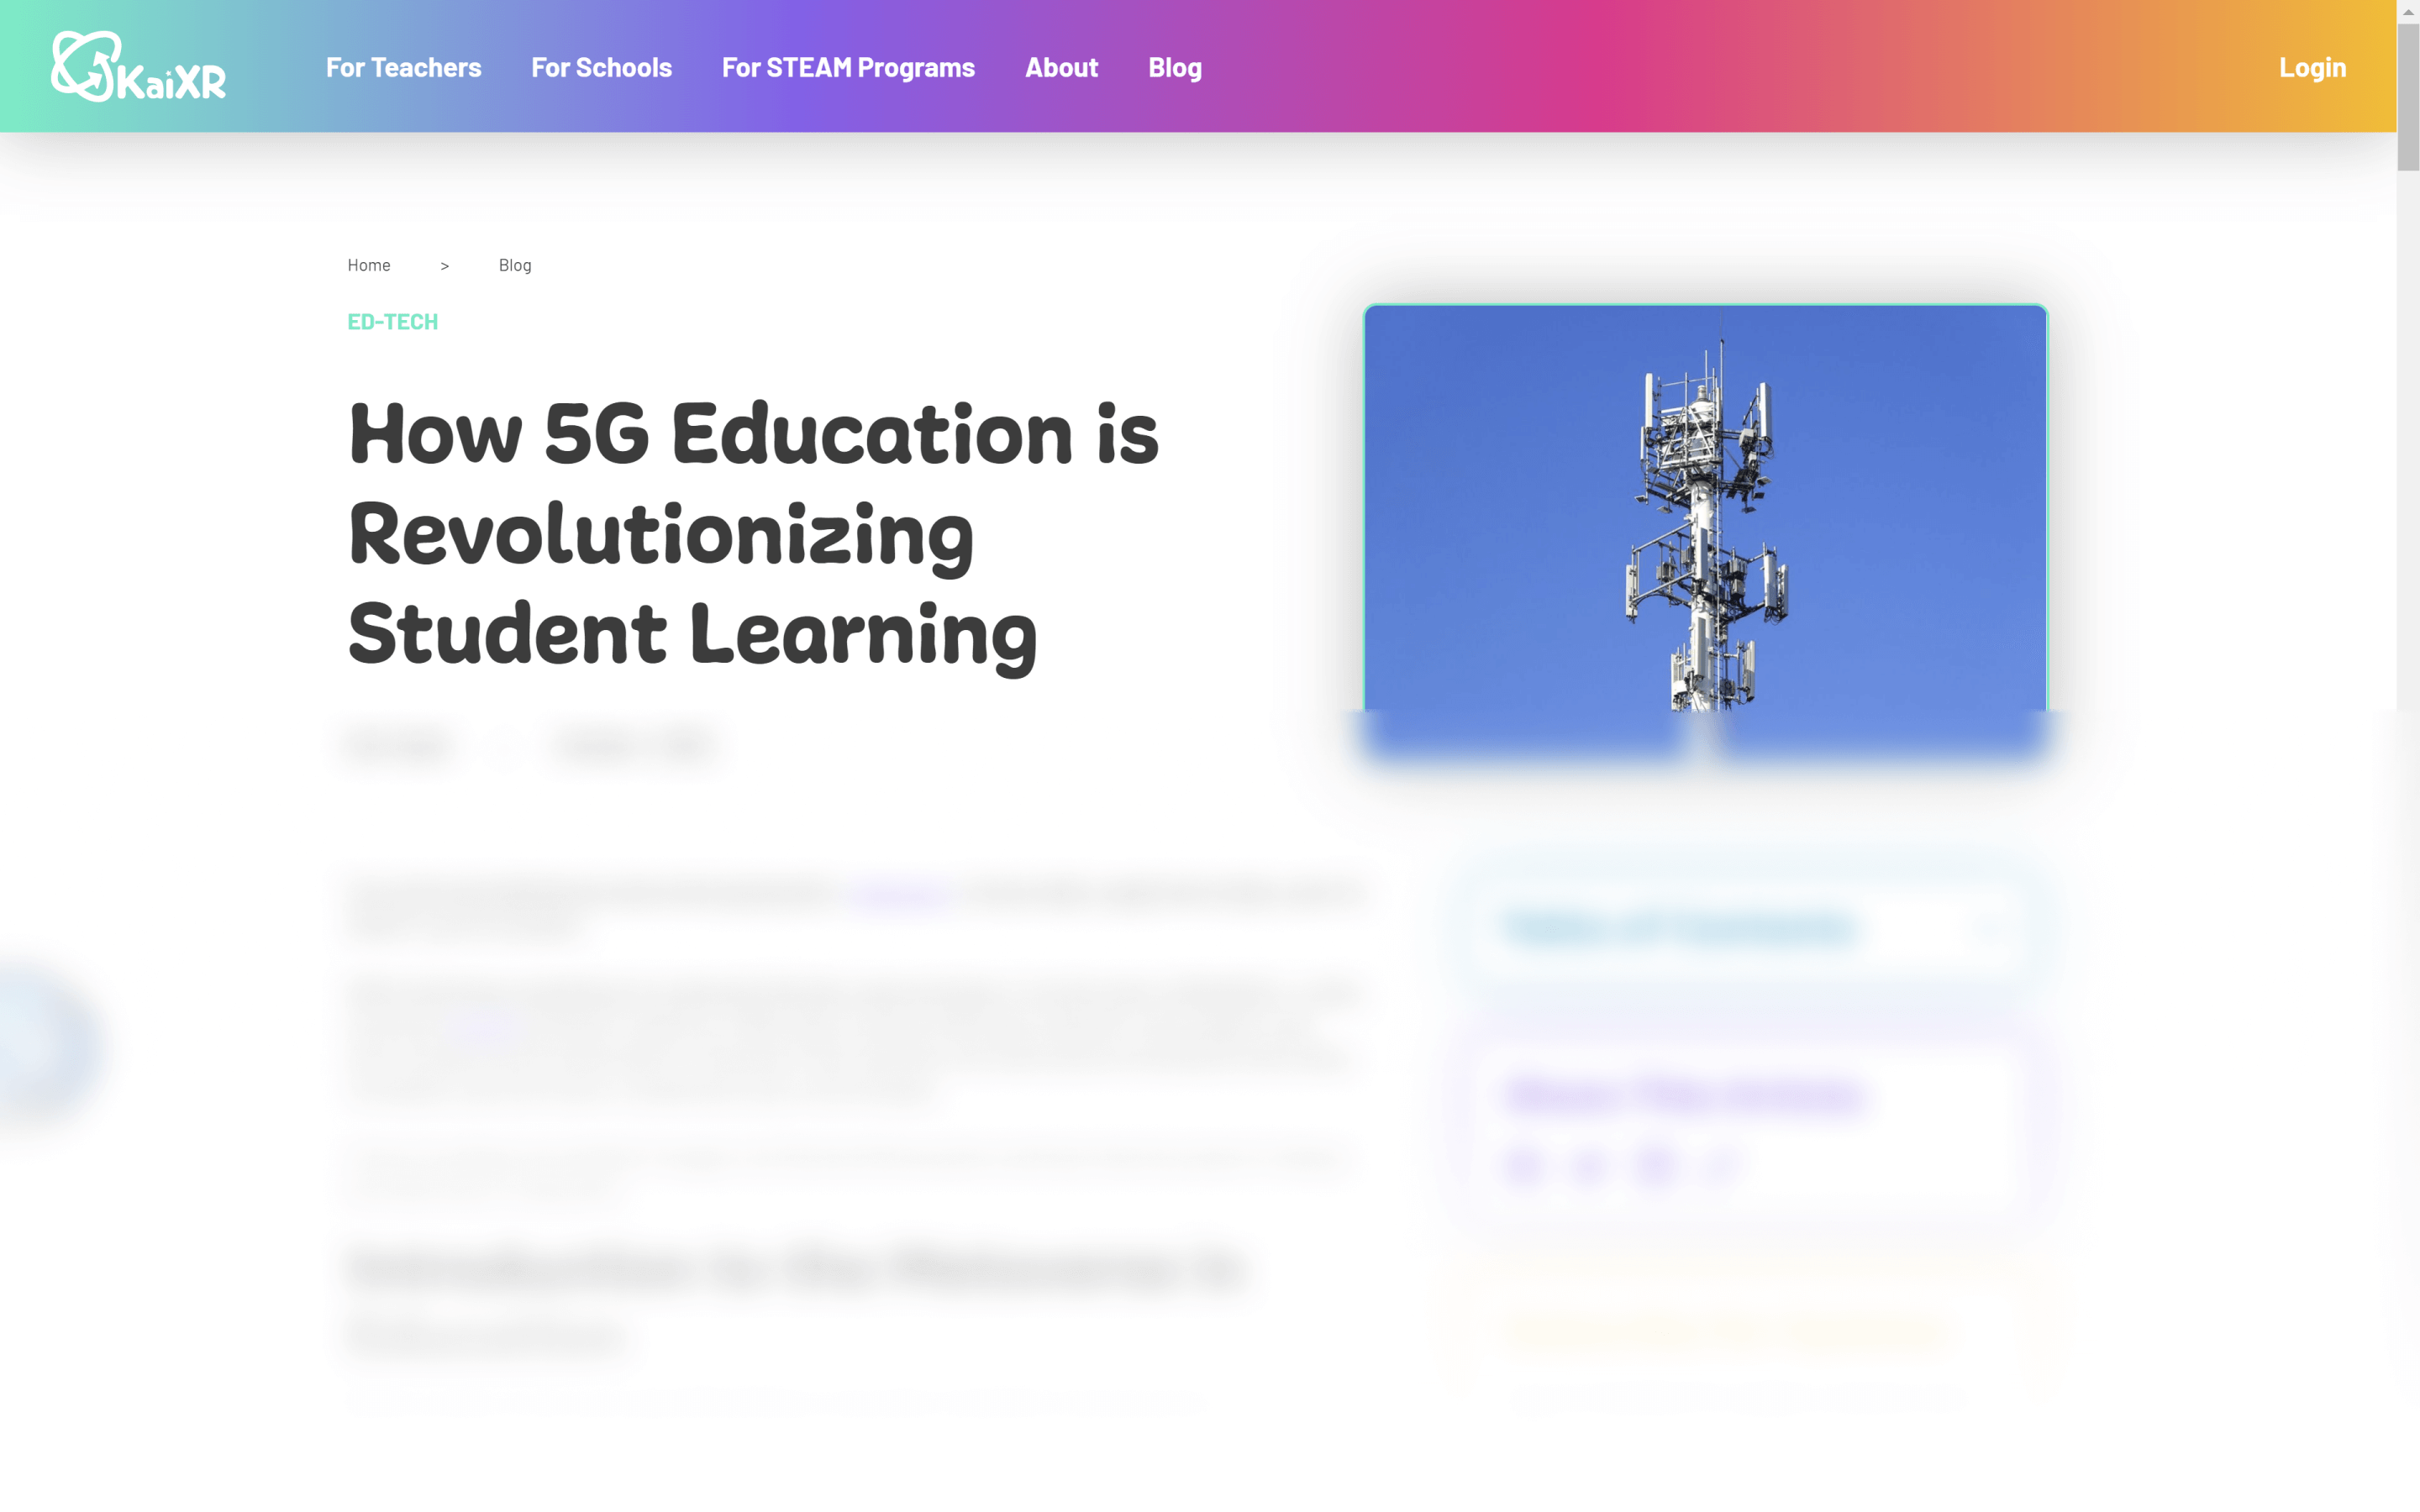 How 5G Education is Revolutionizing Student Learning